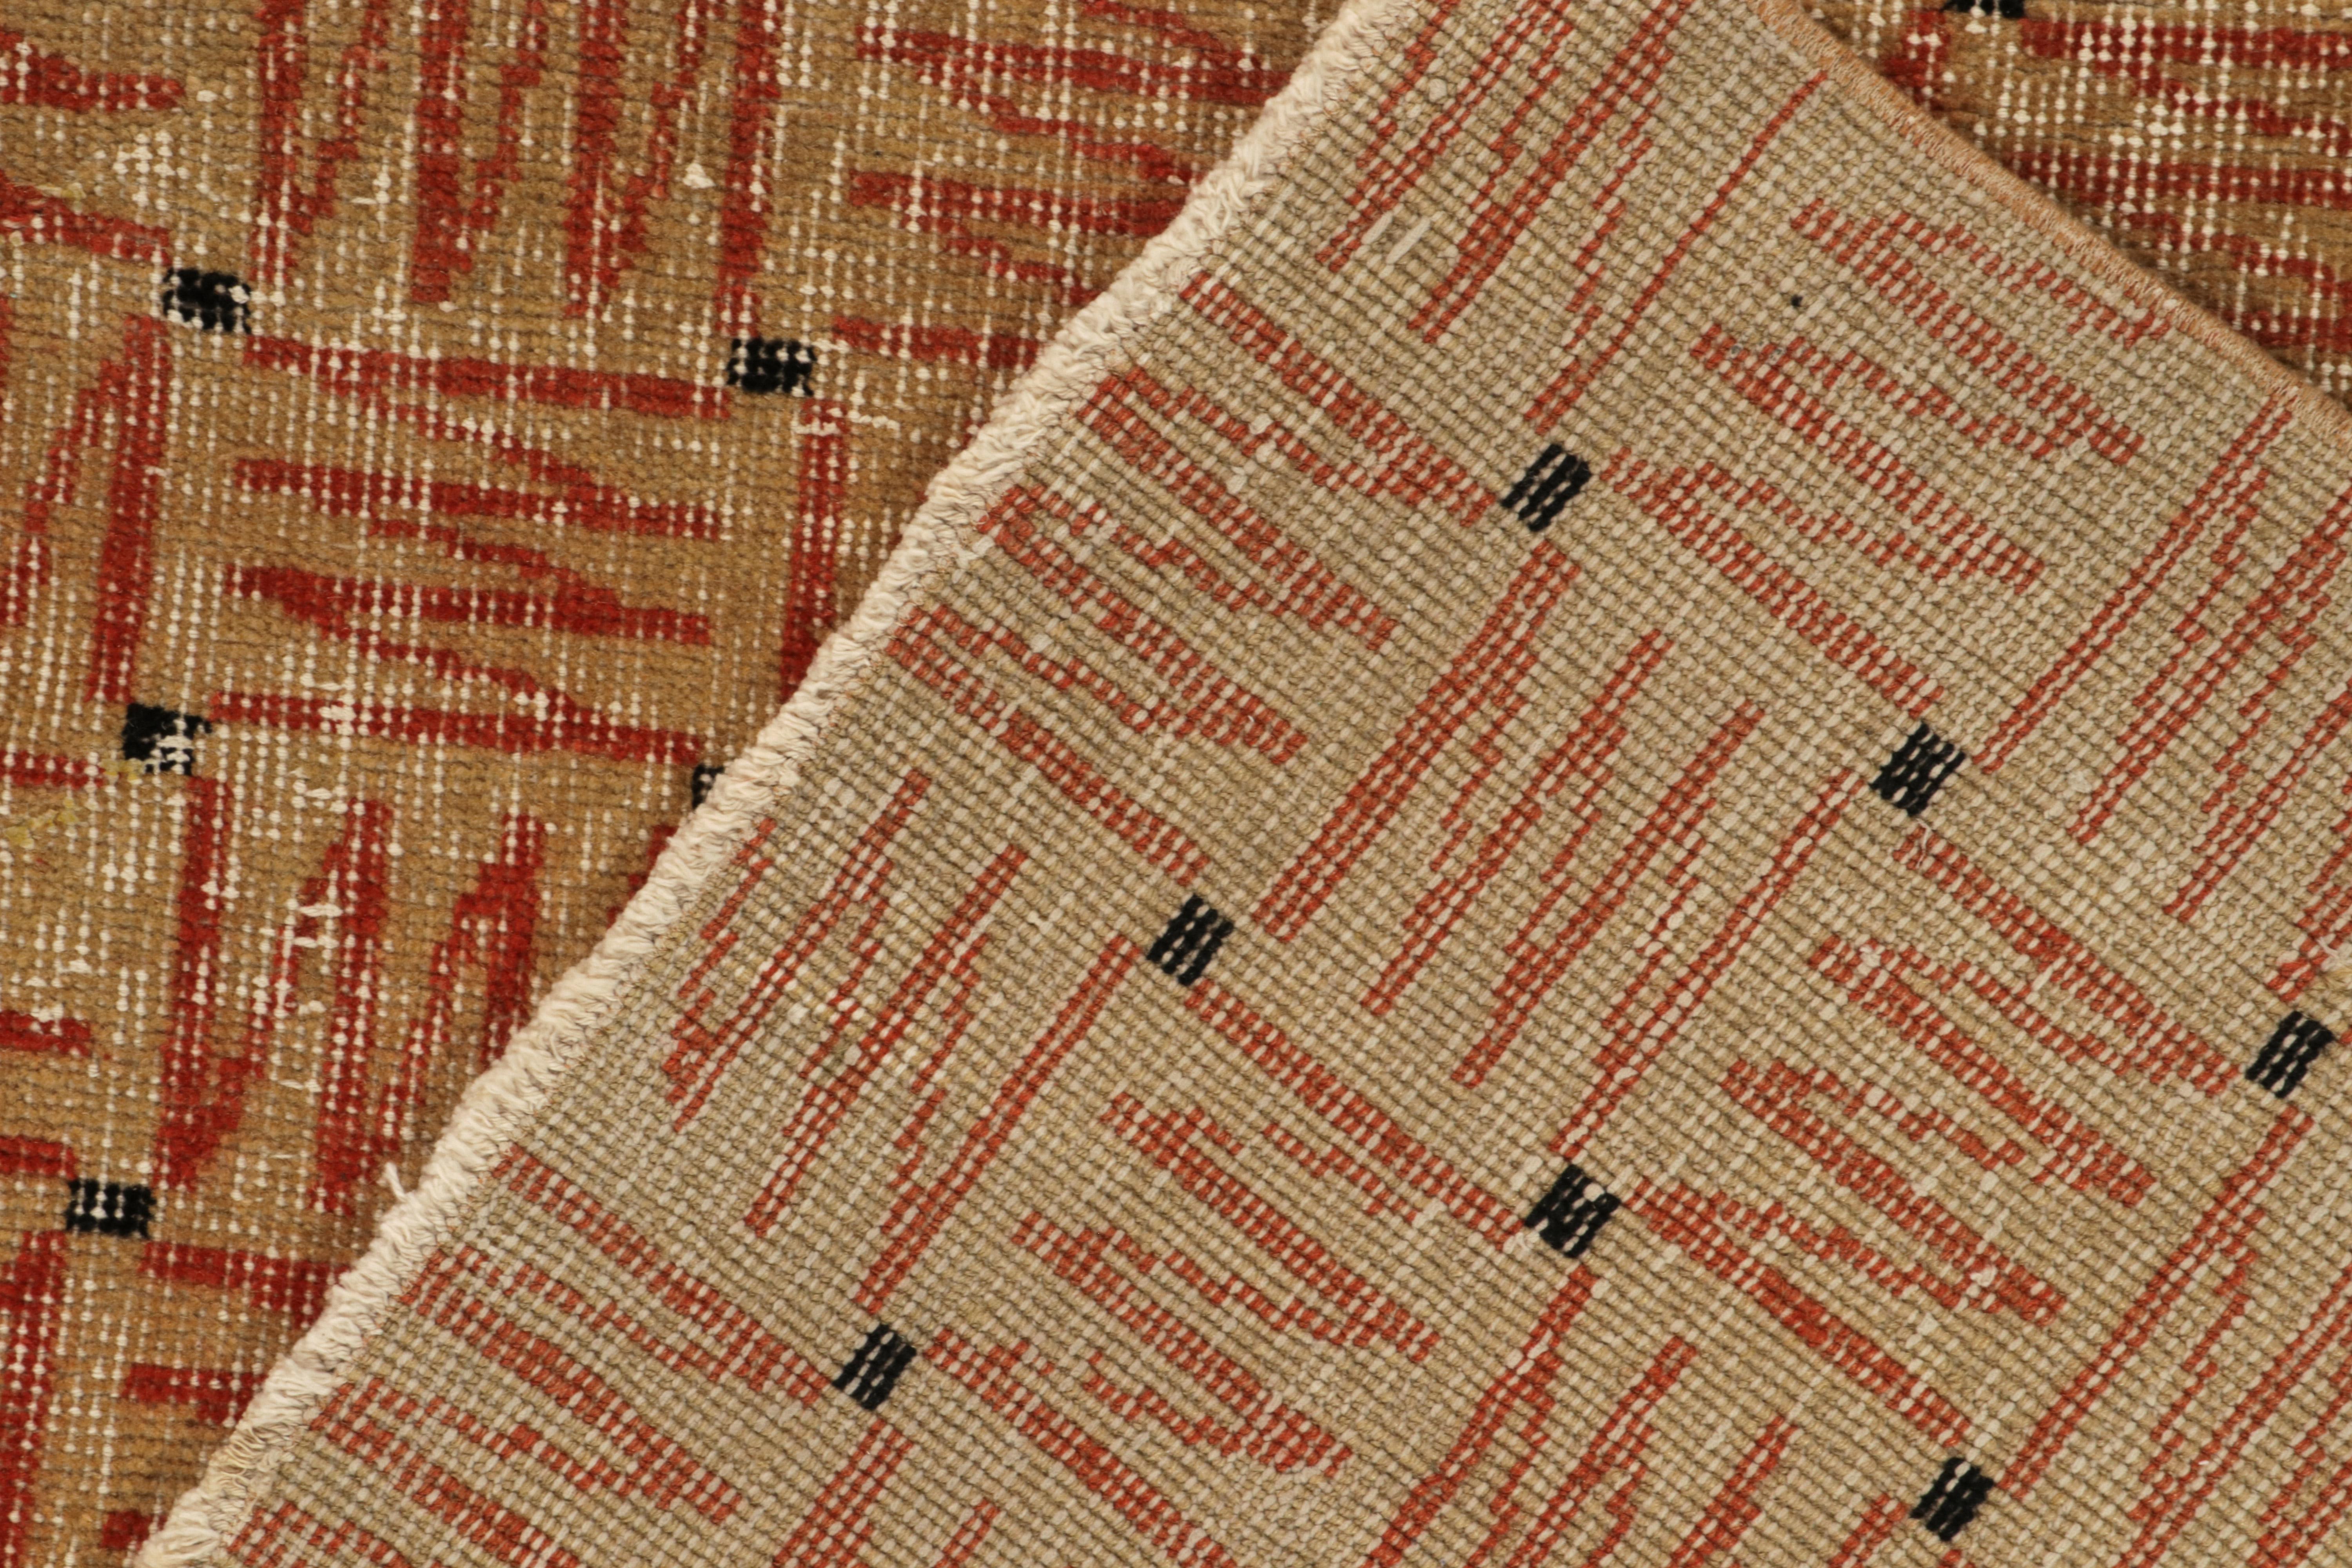 1960s Vintage Deco Rug in Beige-Brown and Red Geometric Patterns, by Rug & Kilim In Good Condition For Sale In Long Island City, NY